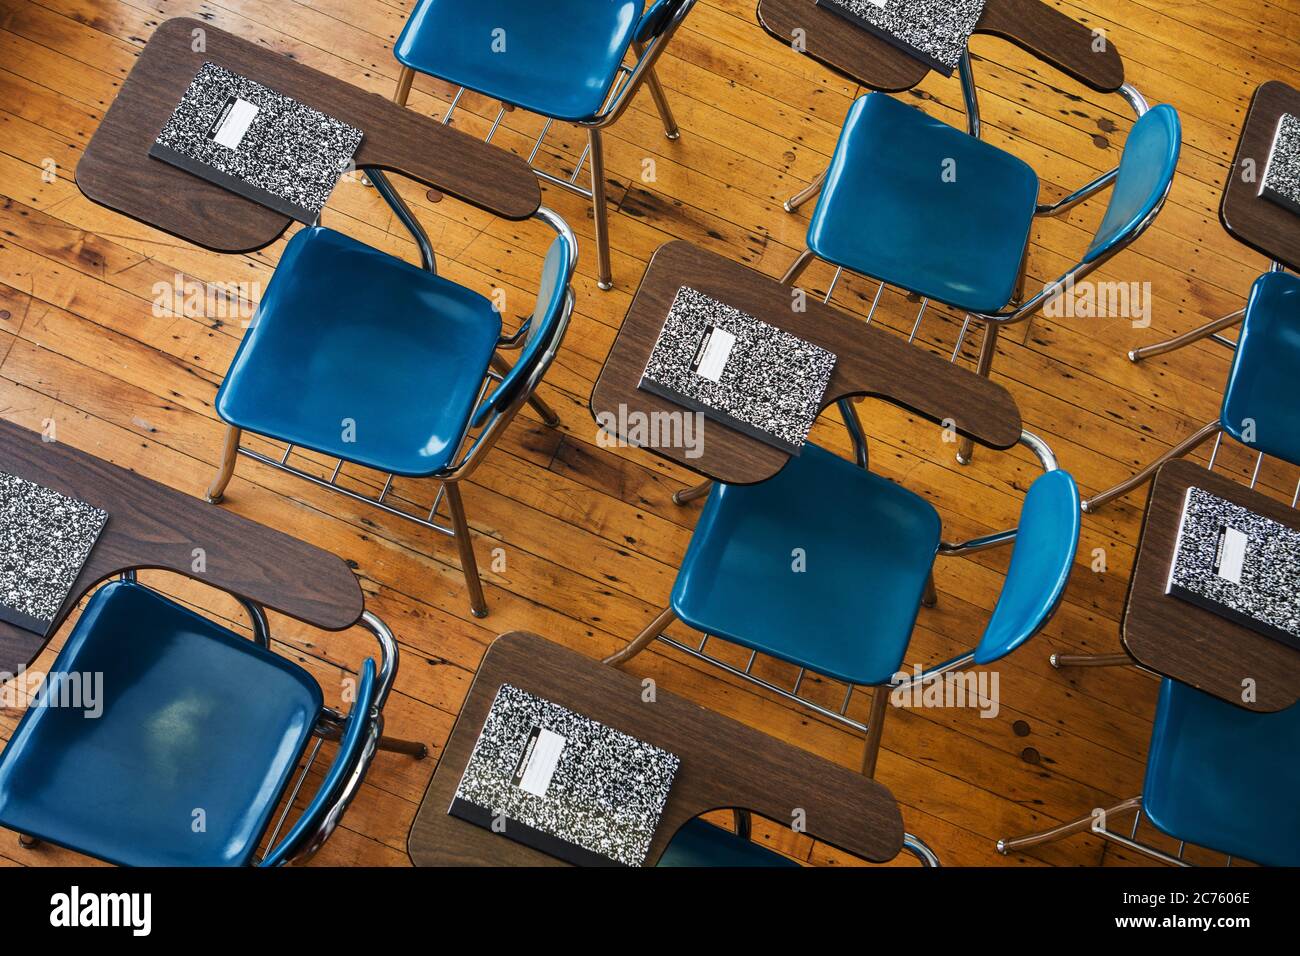 A group of school desks with notebooks on them. Stock Photo